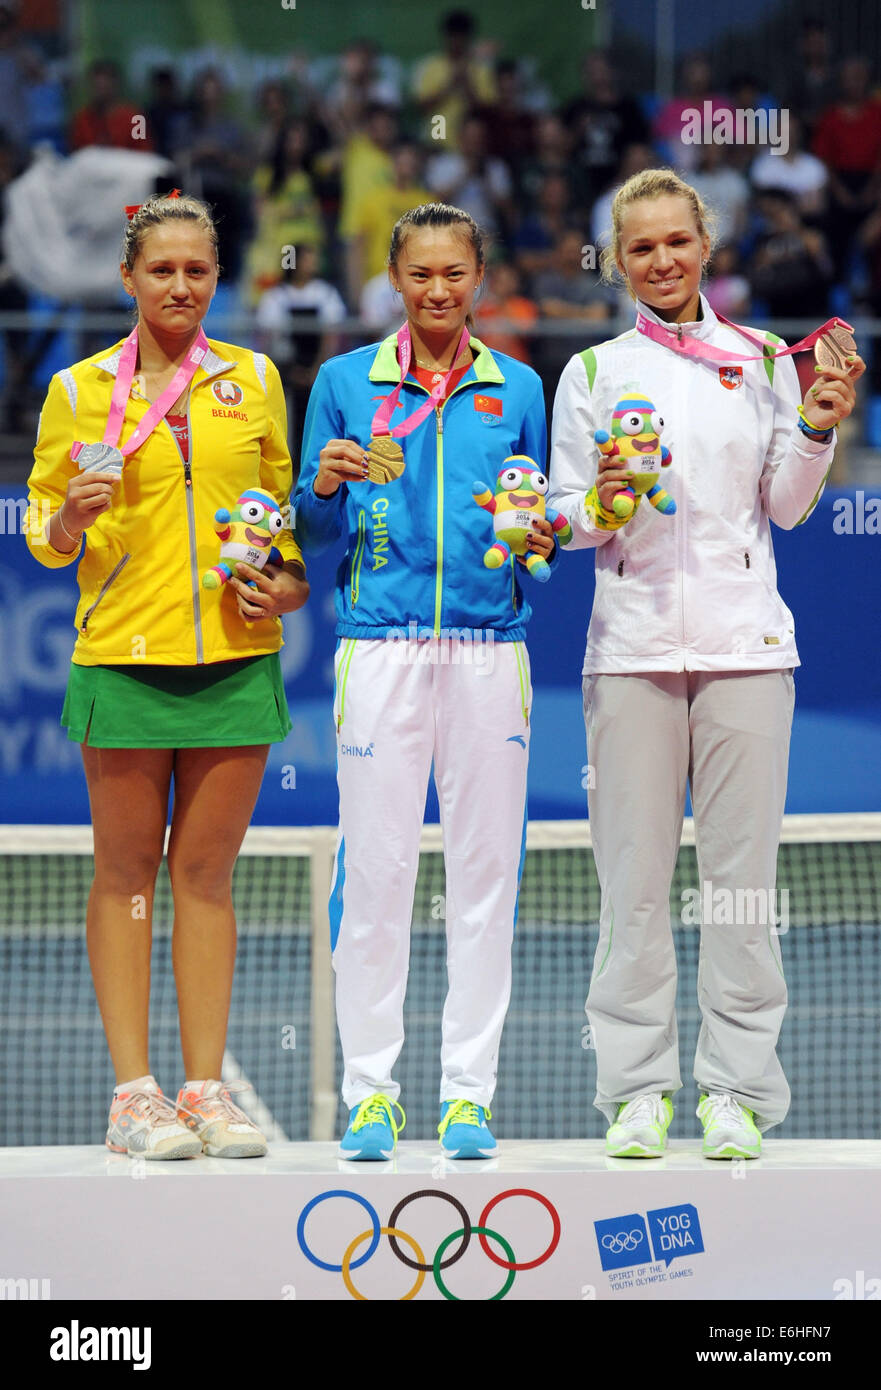 Nanjing, China's Jiangsu Province. 24th Aug, 2014. Gold medalist Xu Shilin of China(C), silver medalist Iryna Shymanovich of Belarus(L) and bronze medalist Akvile Parazinskaite of Lithuania pose on the podium during the awarding ceremony of the Women's Singles tennis match at Nanjing 2014 Youth Olympic Games in Nanjing, capital of east China's Jiangsu Province, on Aug. 24, 2014. Credit:  Chen Yehua/Xinhua/Alamy Live News Stock Photo